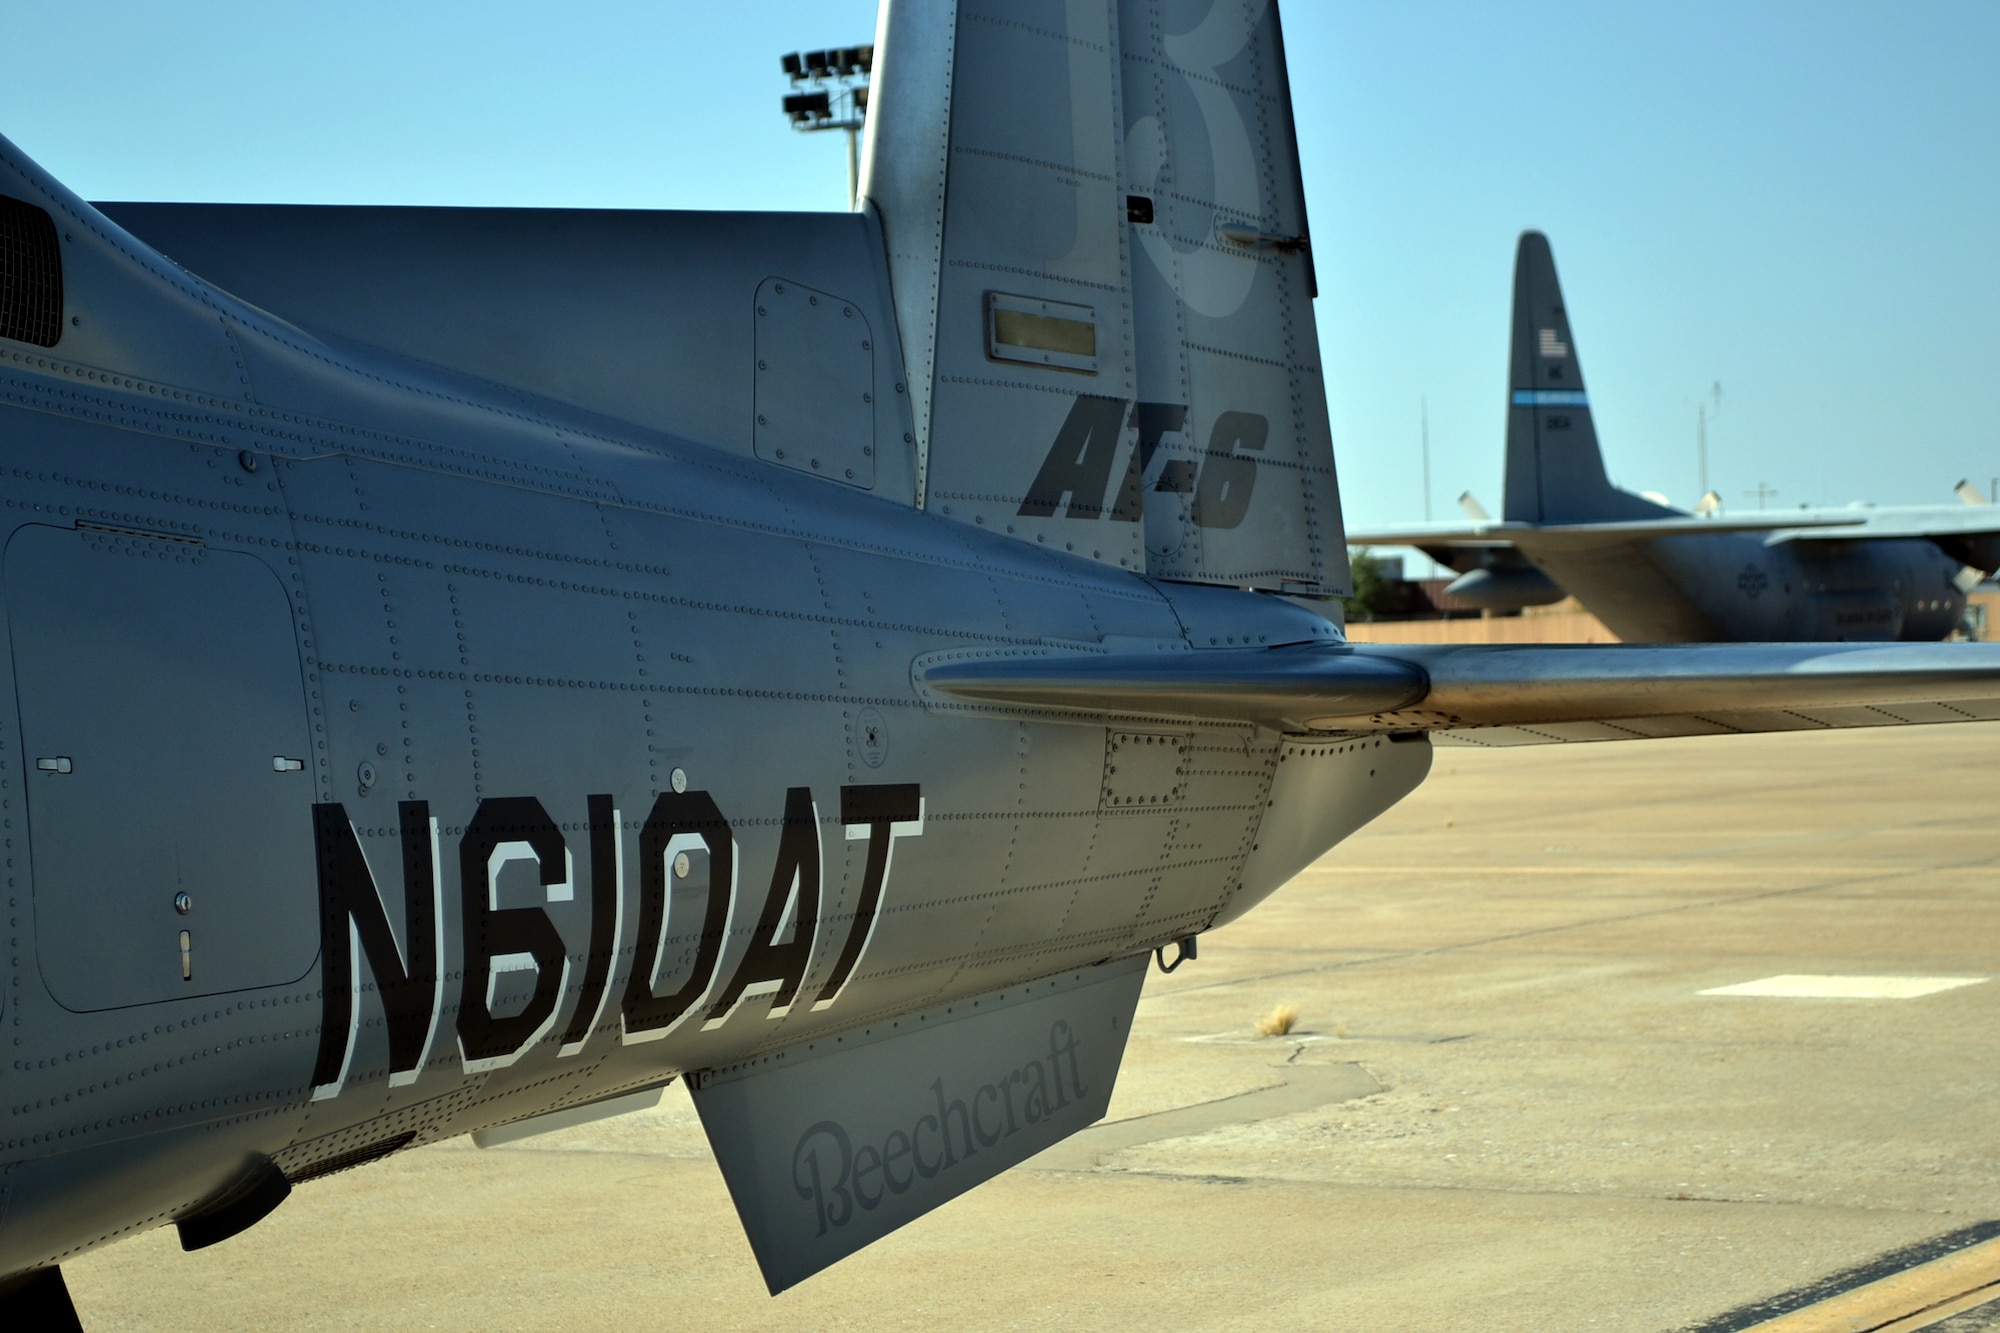 The AT-6 is based on the original T-6 design. Pilot Ben Griffith, the program executive for Beechcraft Light Attack Programs, said that the plane is more durable and sustainable. (Official U.S. Air Force photo by Airman 1st Class Brigette Waltermire)